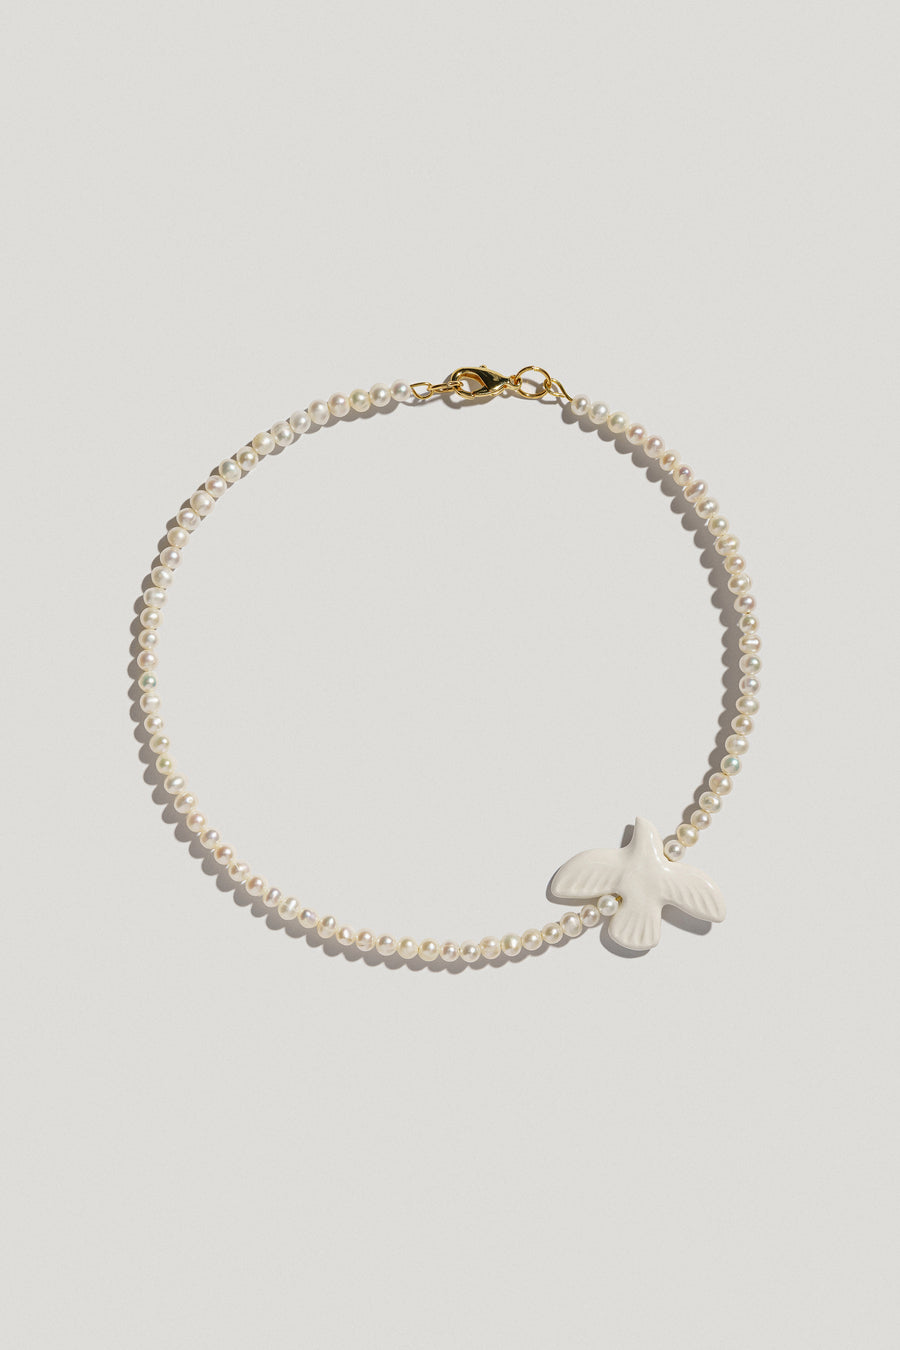 Myrni necklace with small-sized pearls and a porcelain bird